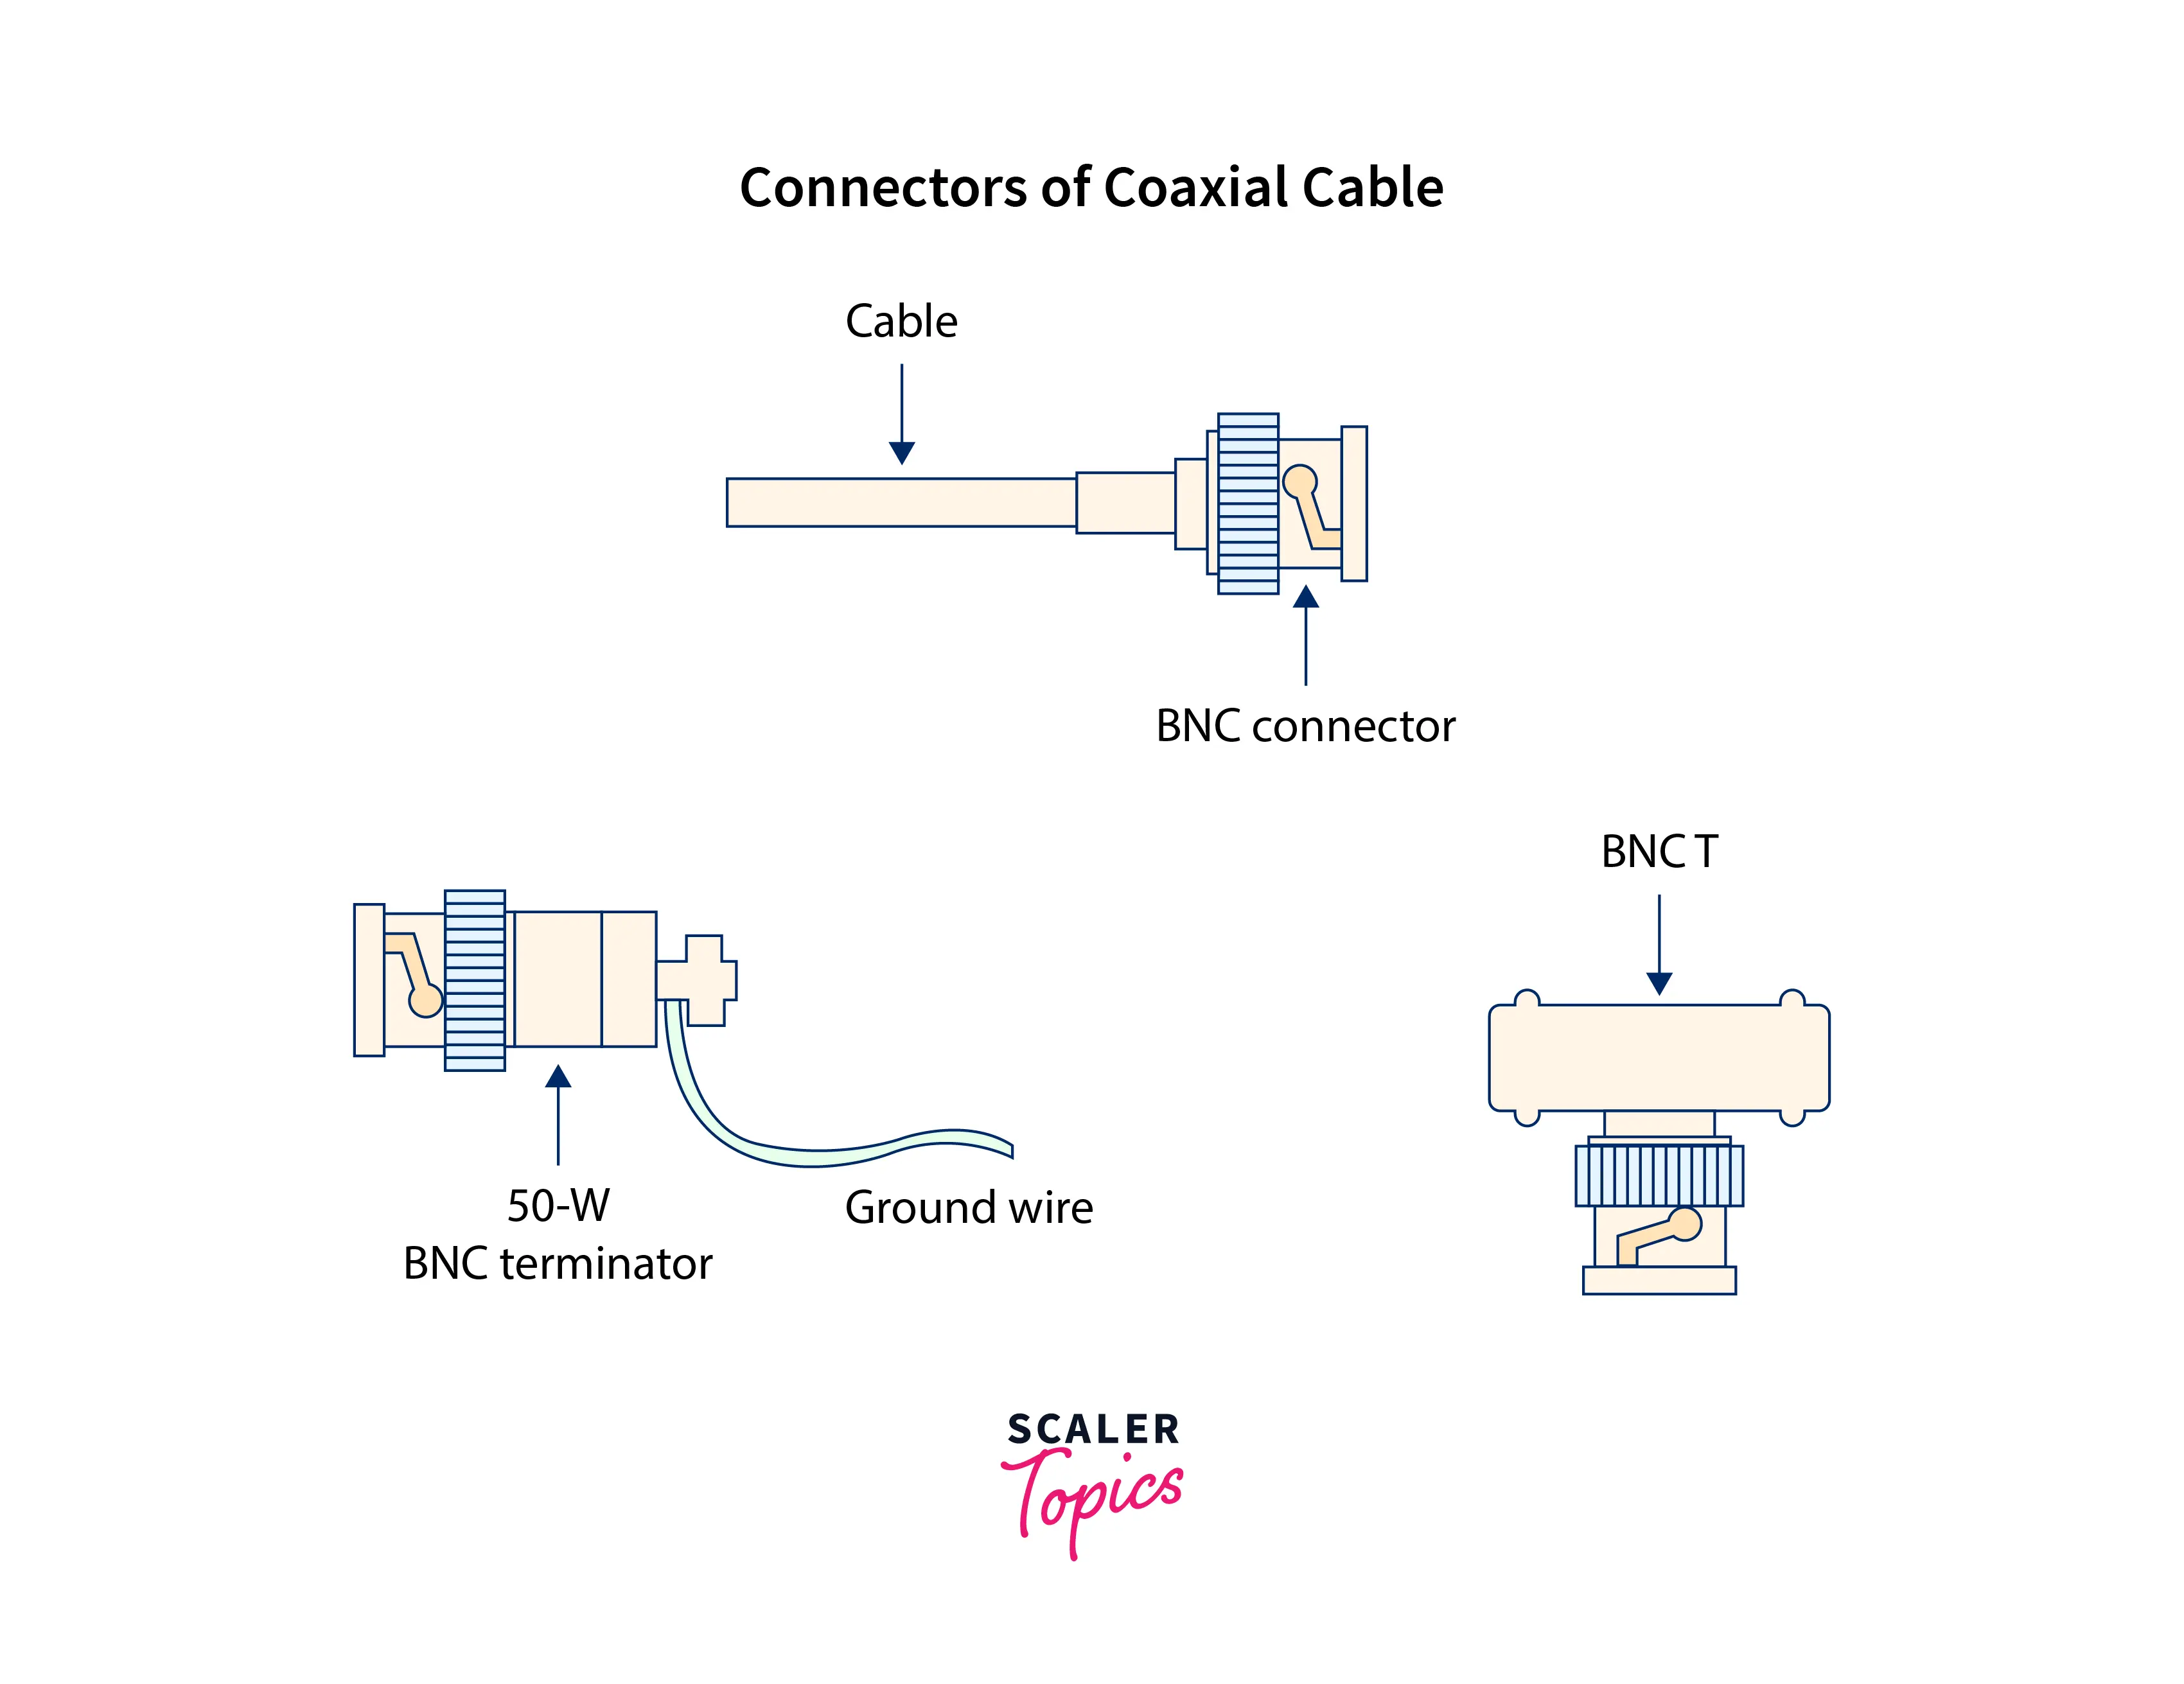 connectors-of-coaxial-cable